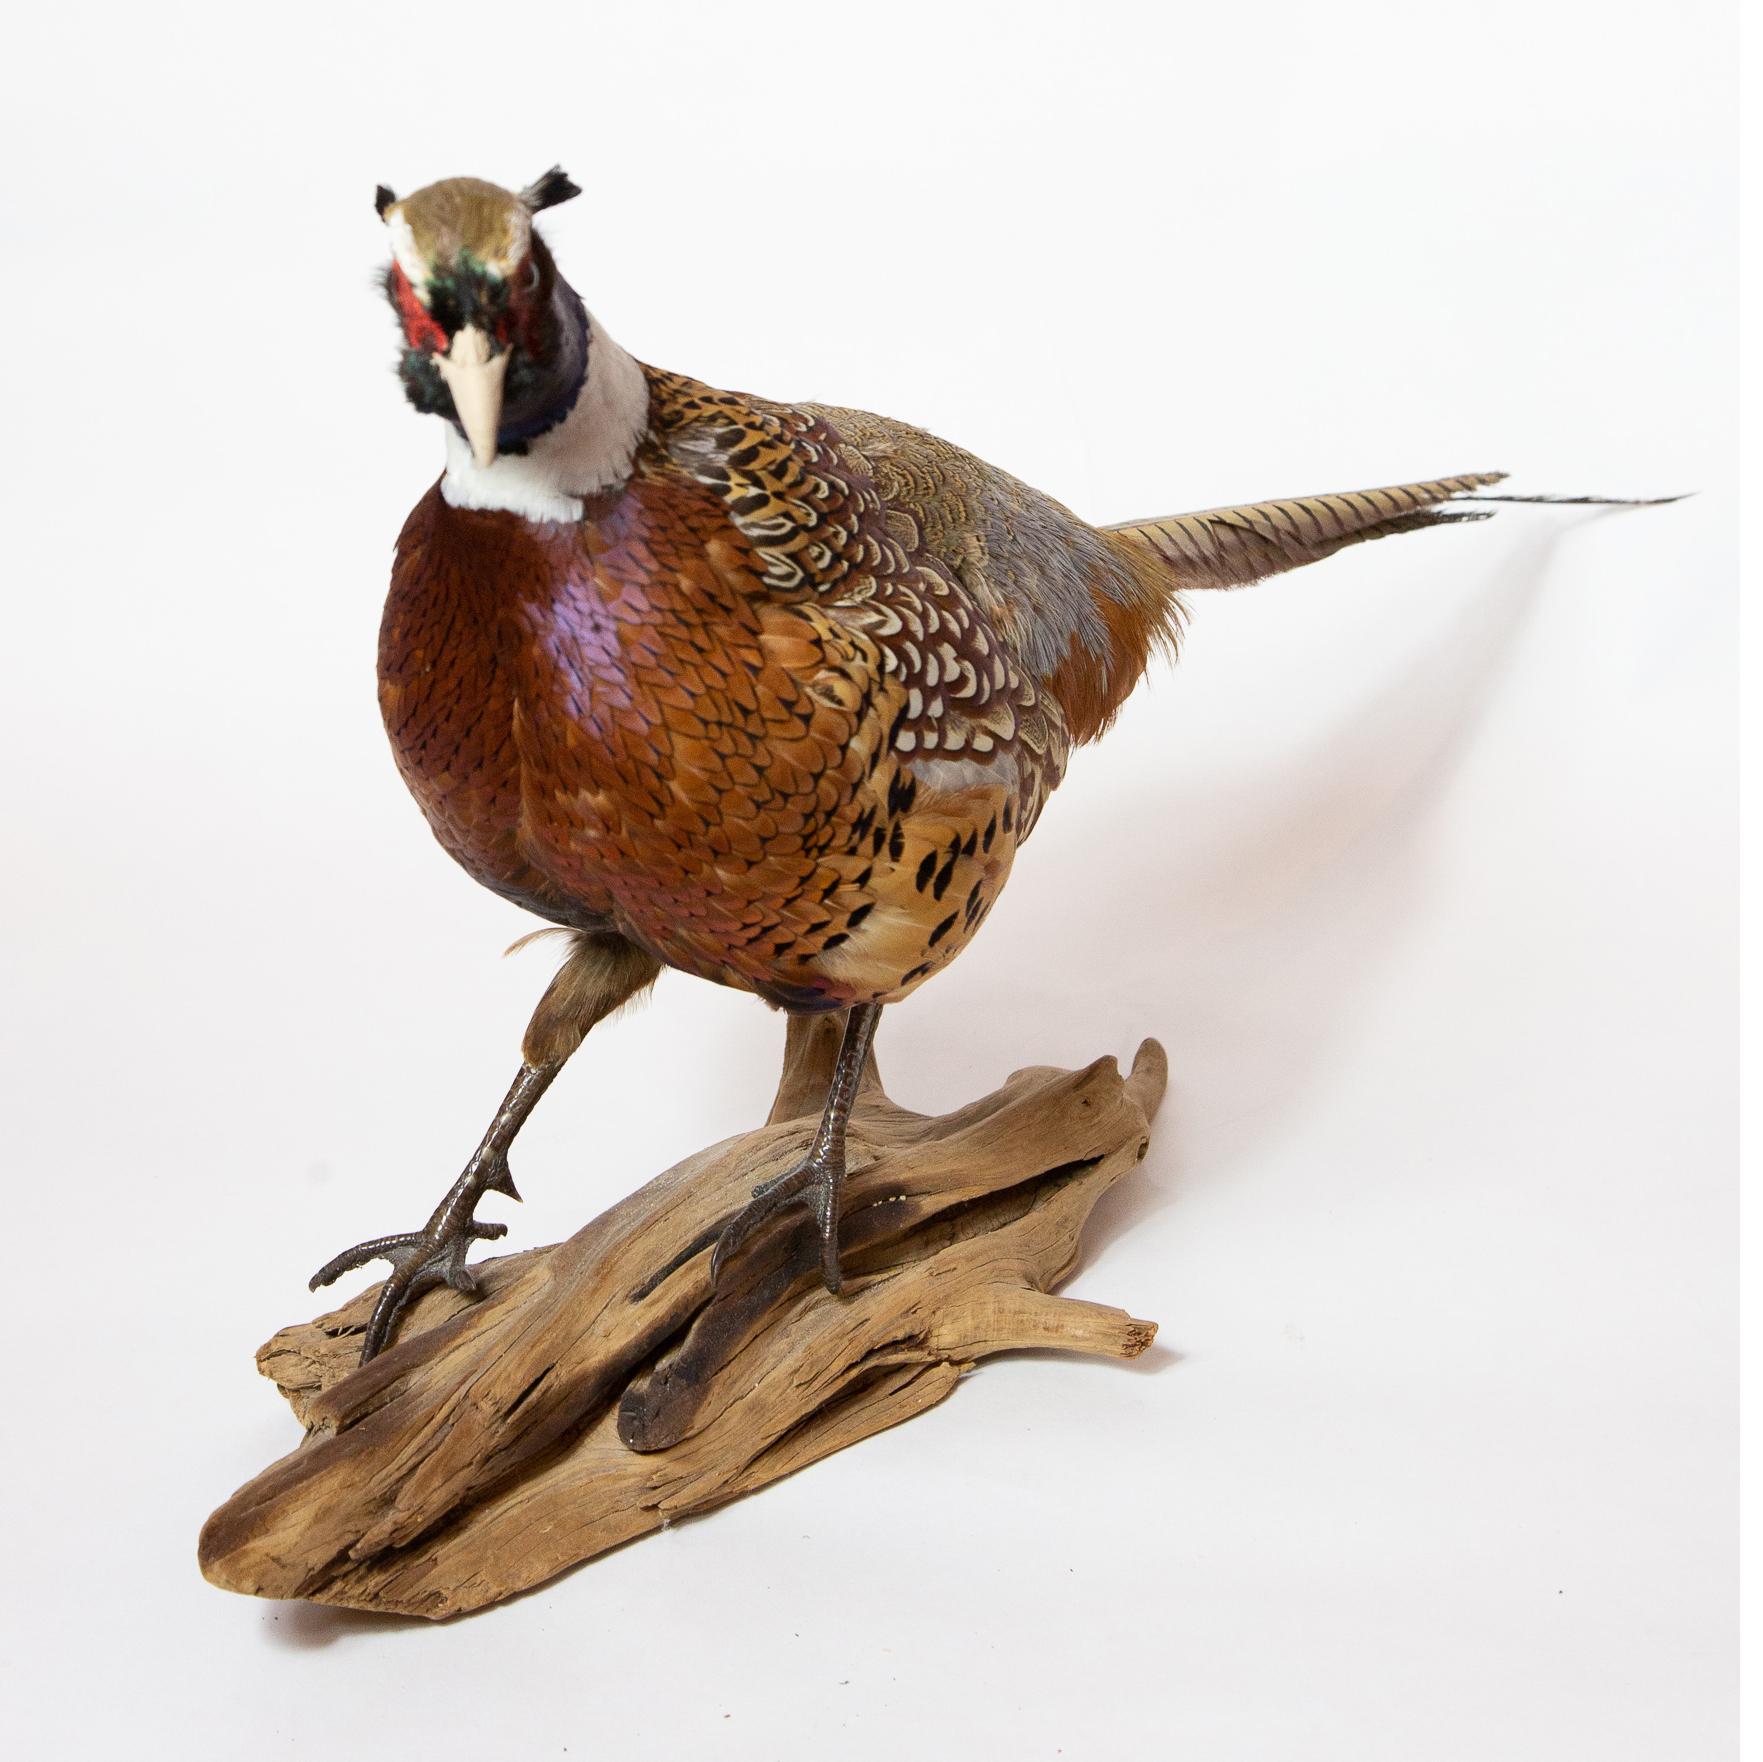 Ringneck Pheasant. Taxidermy ringneck pheasant on driftwood. The ringneck pheasant (Phasianus colchicus) is a bird in the pheasant family. It is native to Asia and has been widely introduced elsewhere. In the United States it is considered as a game